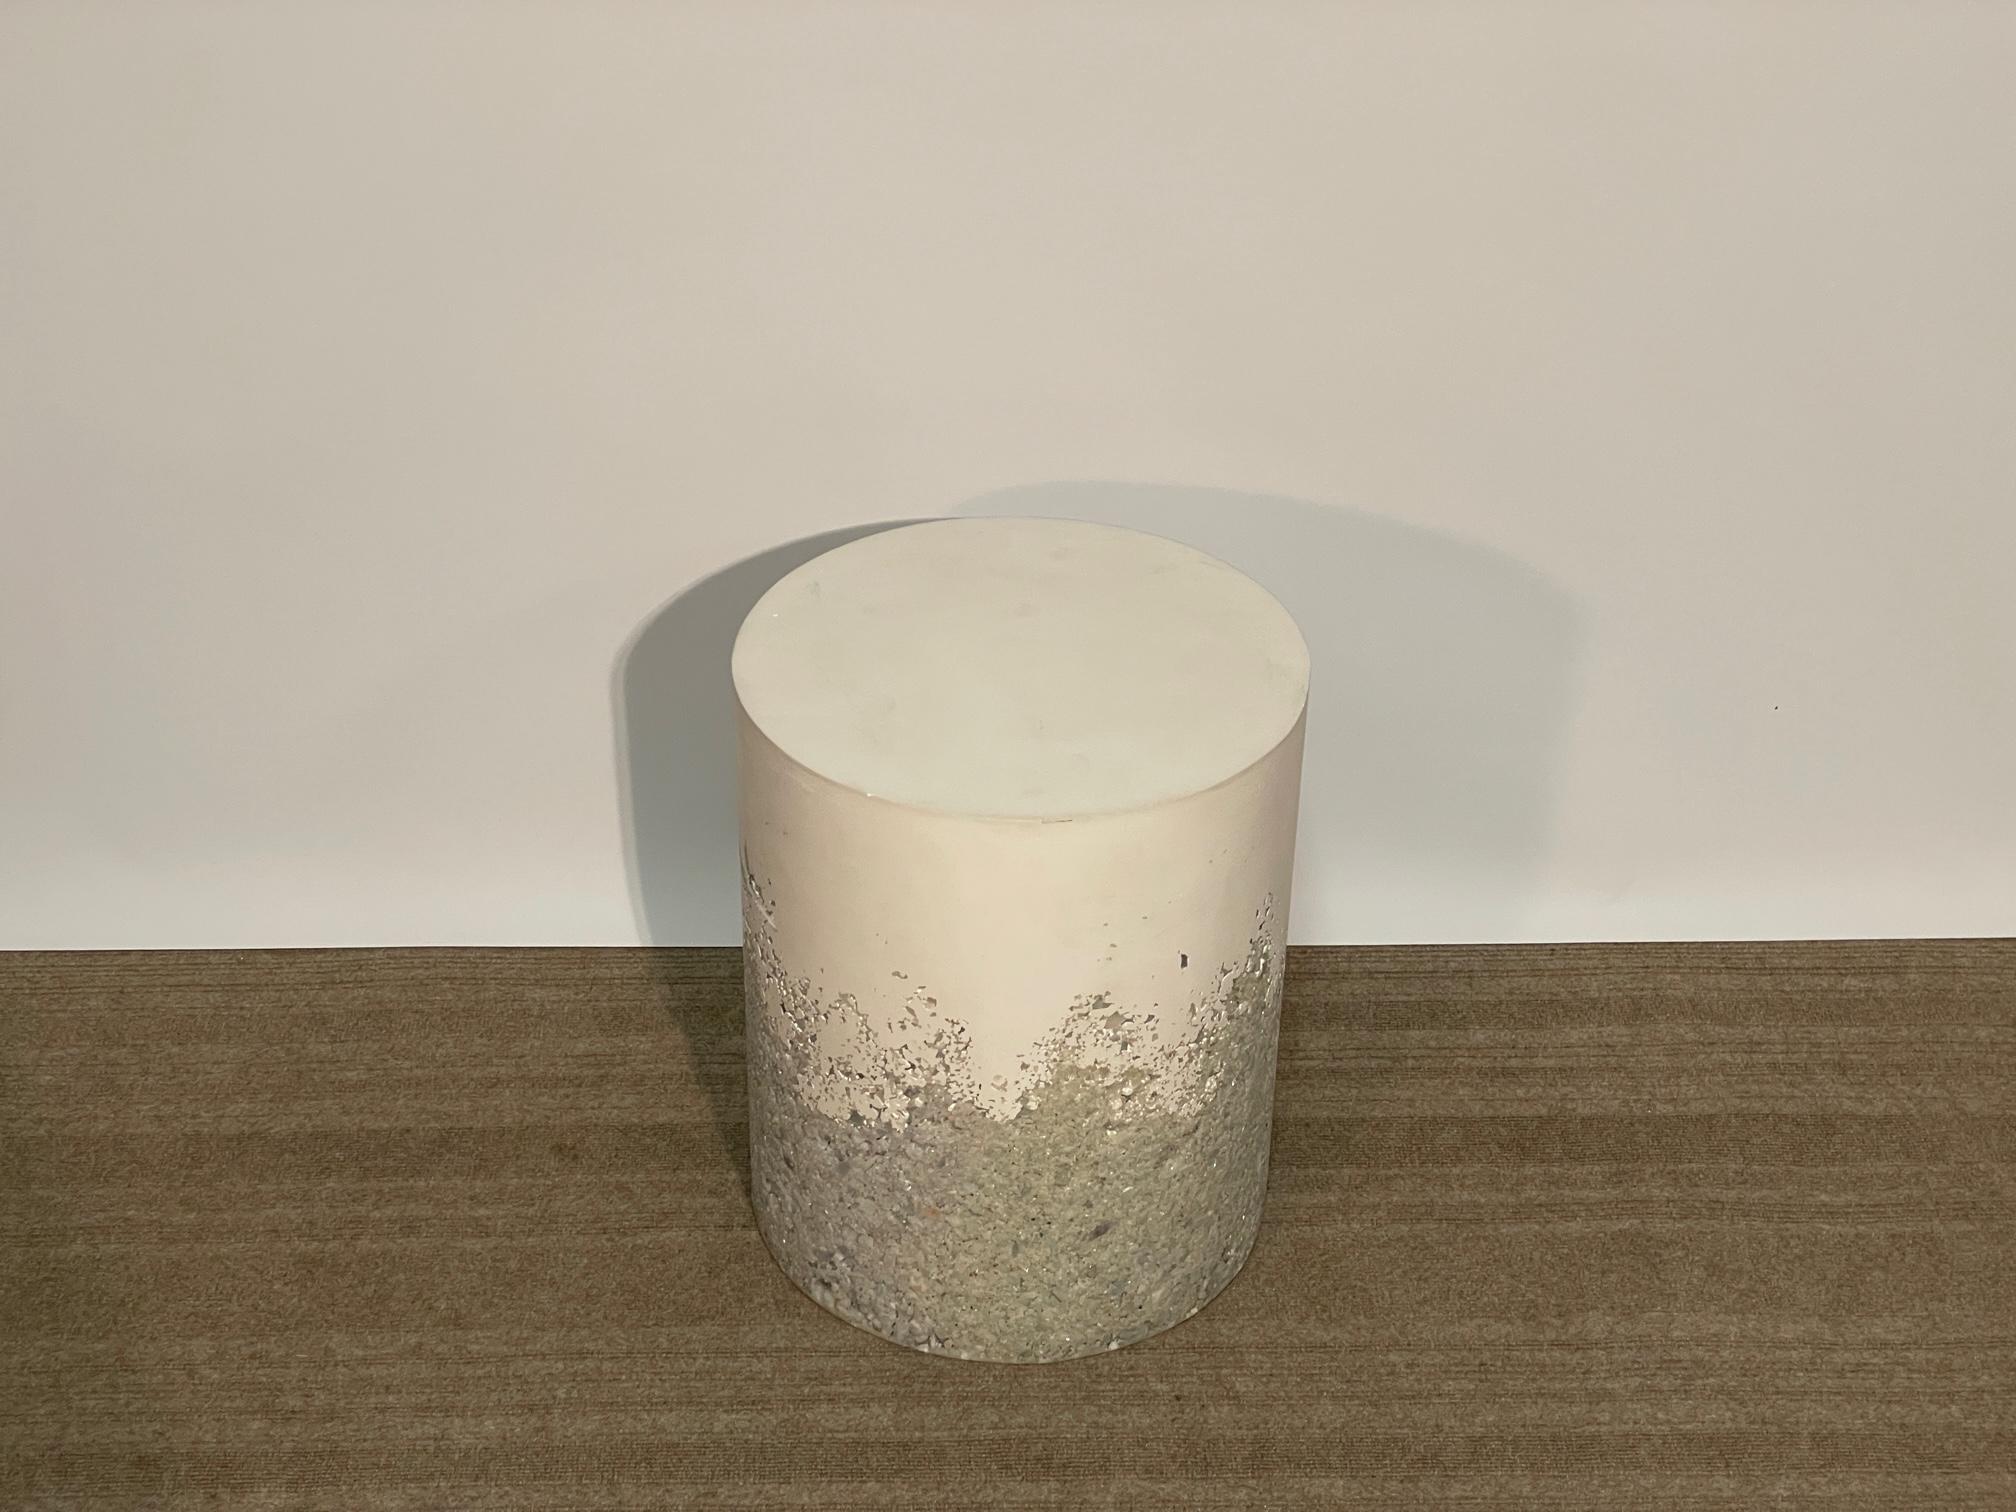 The Drum by Amoia Studios is a study in fusion between the delicate Clear Calcite from India merged with Plaster finished Cement.  The millions of different facets created by the Calcite blends into a smooth cylinder up top.  Useful as either a side